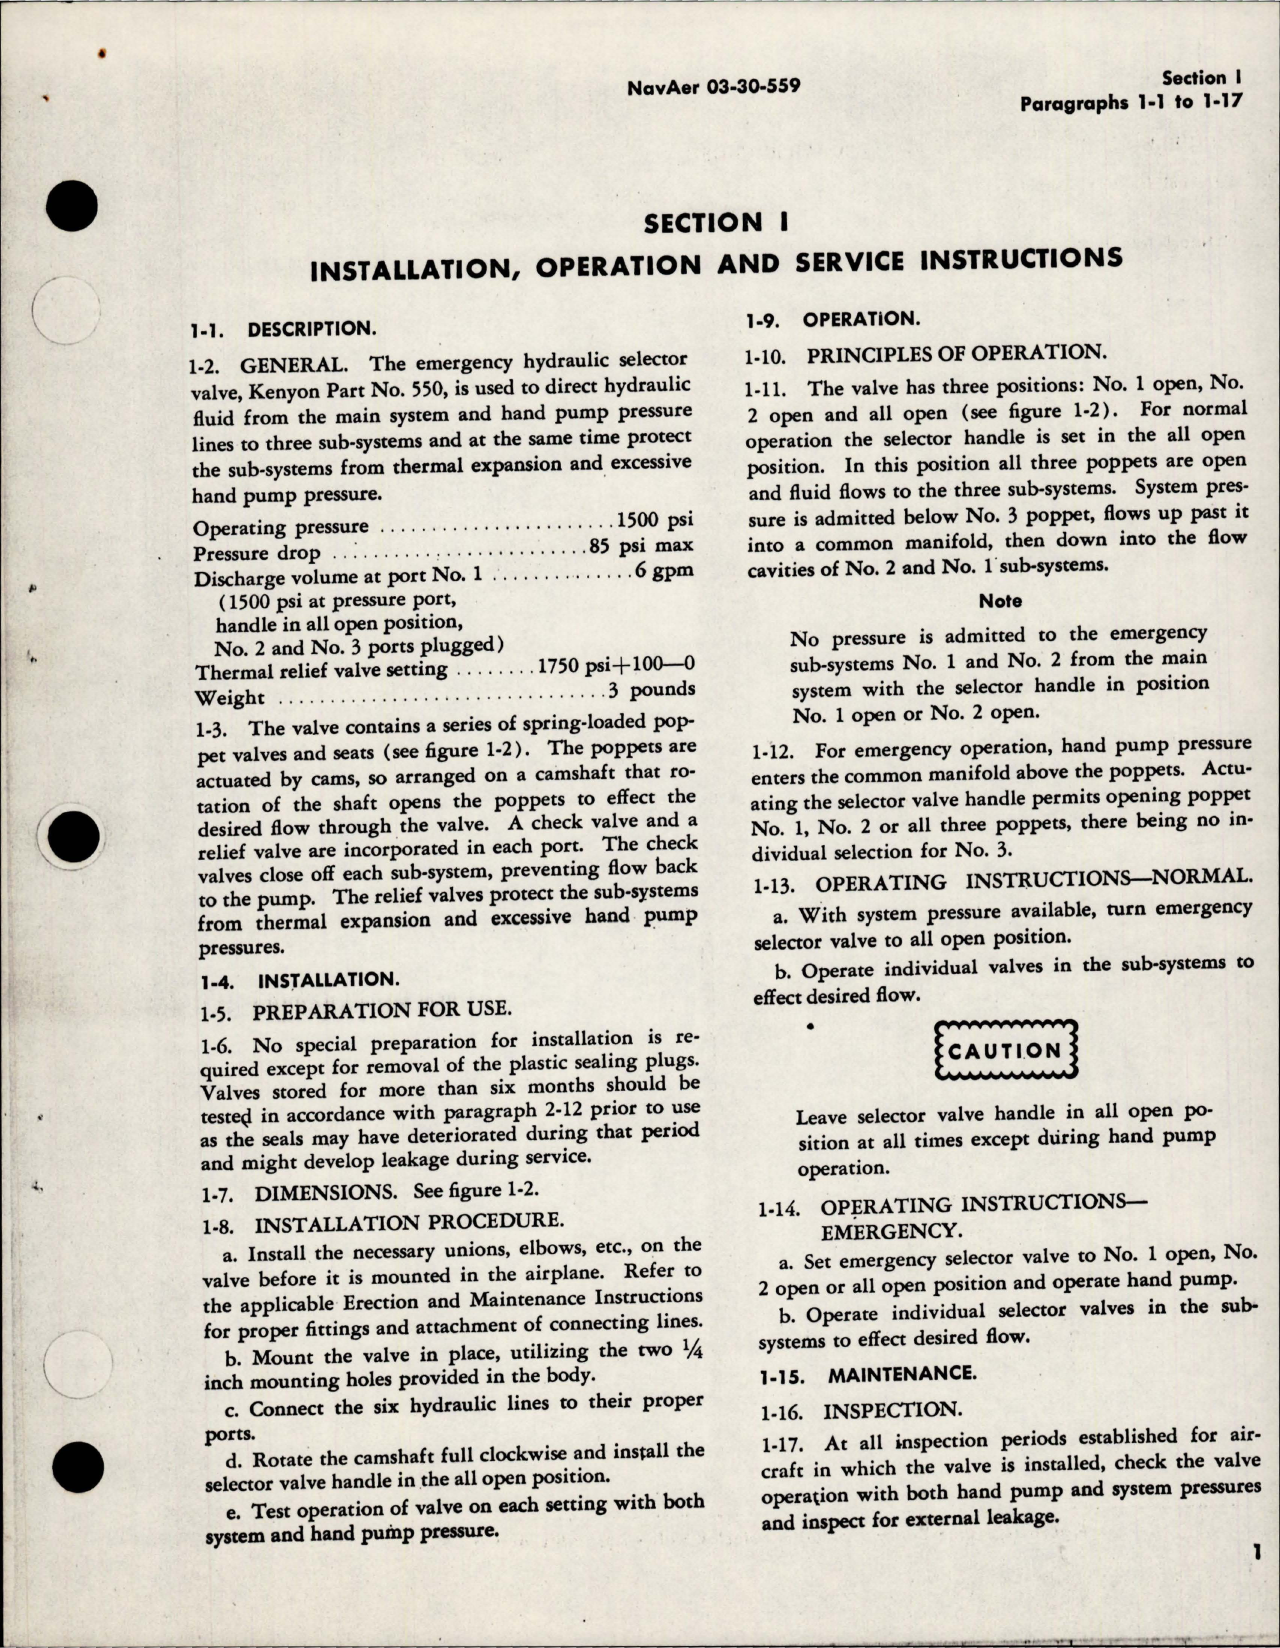 Sample page 5 from AirCorps Library document: Operation, Service and Overhaul Instructions w Parts for Emergency Hydraulic Selector Valve - Model 550